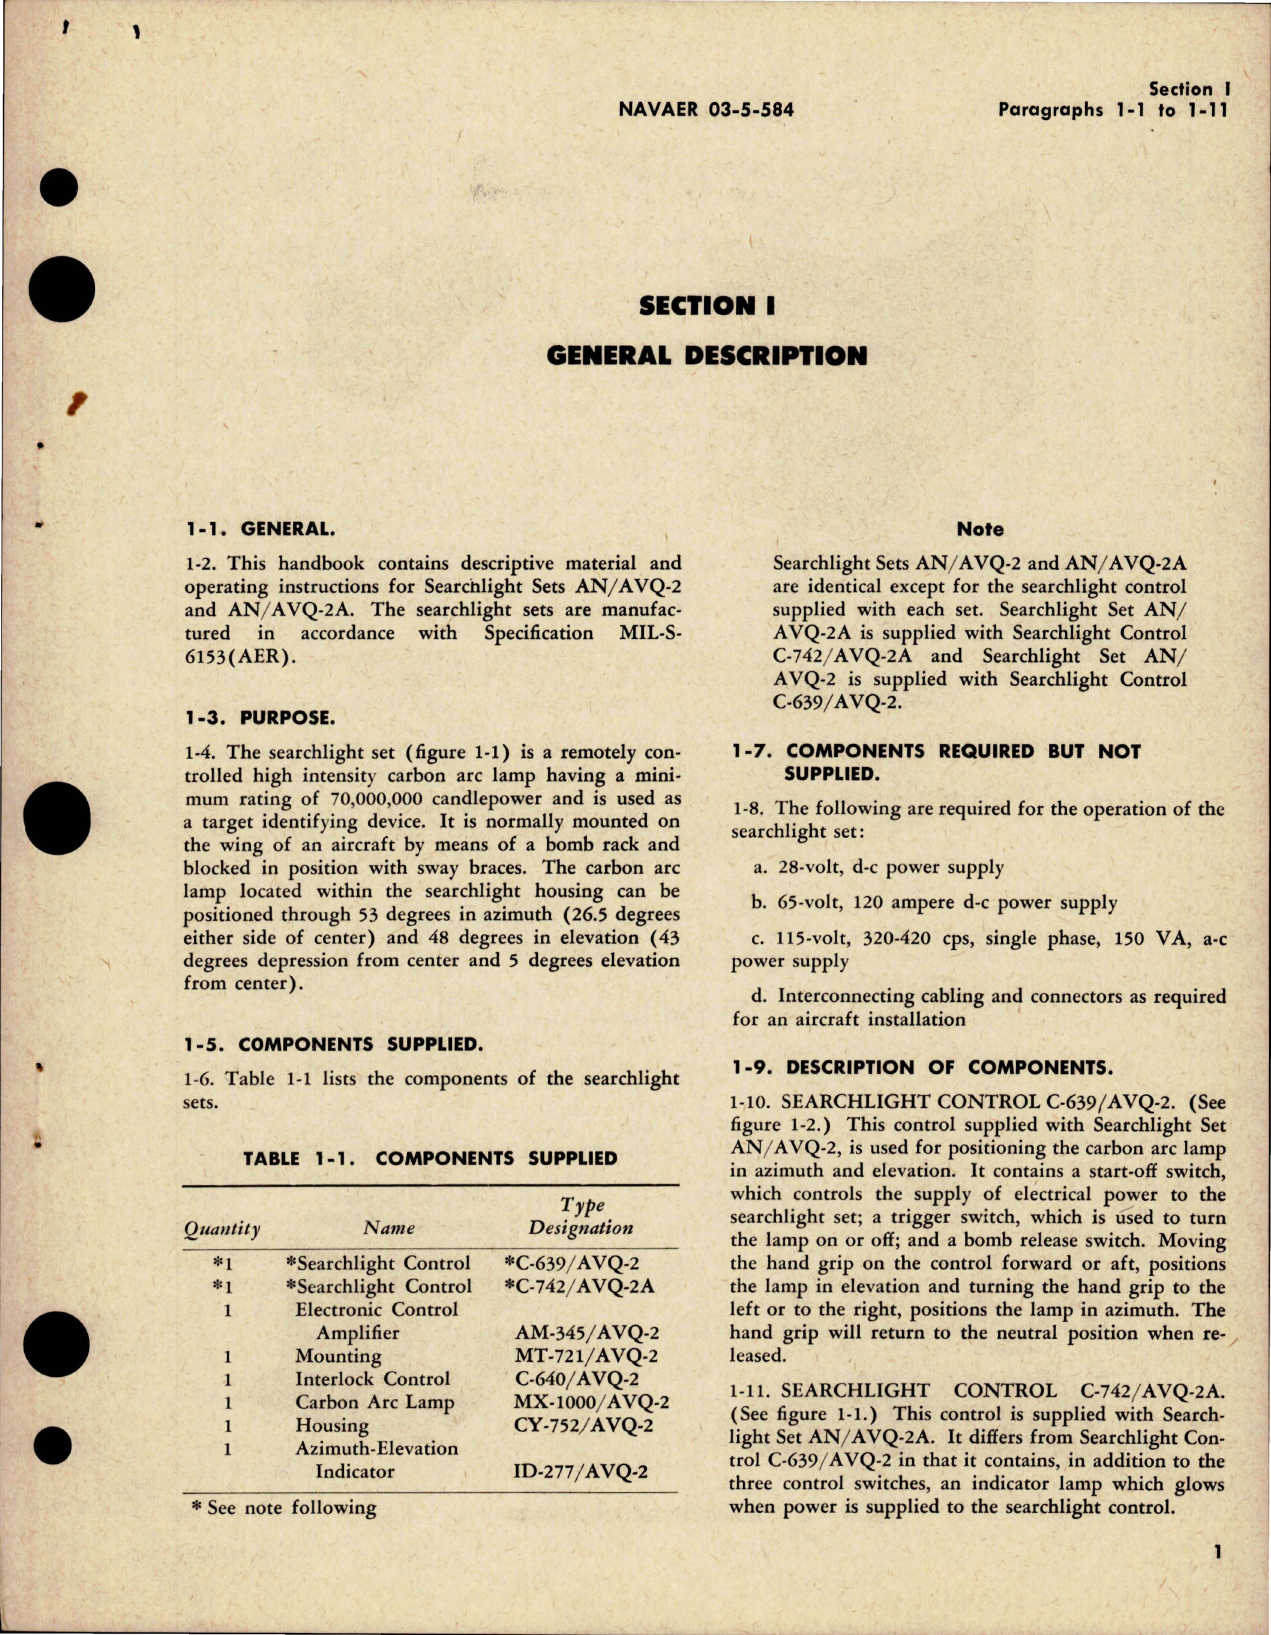 Sample page 5 from AirCorps Library document: Operation Instructions for Aircraft Searchlight Sets - AN-AVQ-2 and AN-AVQ-2A - Installations in AF-2S, P2V-5, AD-4N, AD-5N, and S2F